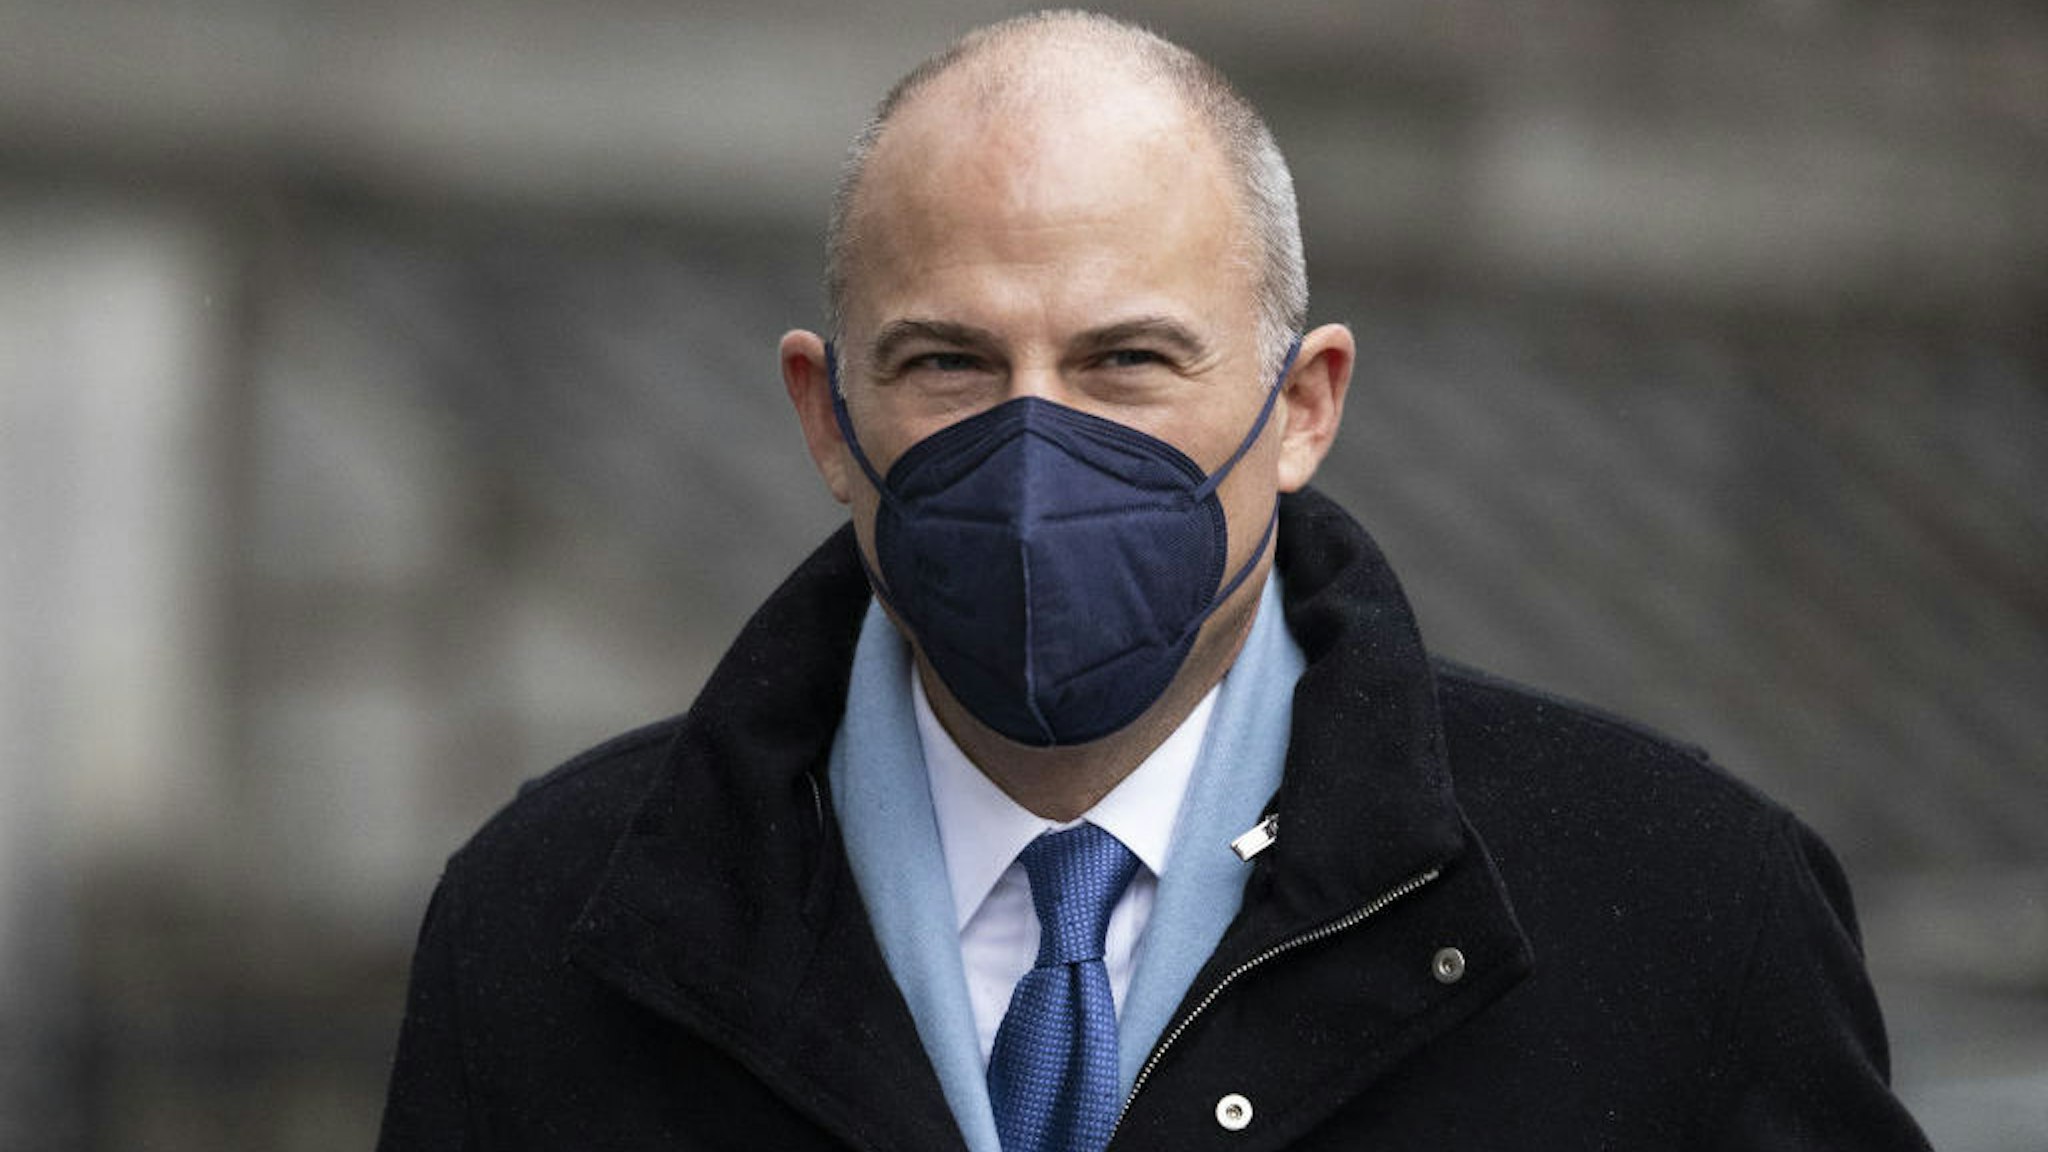 Michael Avenatti, attorney and founding partner of Eagan Avenatti LP, arrives at federal court in New York, U.S., on Thursday, Feb. 3, 2022. A federal jury began deliberations in the fraud trial of Michael Avenatti Wednesday after the disgraced celebrity lawyer and prosecutors clashed over whether he fleeced his former client Stormy Daniels out of money from a book deal, reports the Wall Street Journal. Photographer: Angus Mordant/Bloomberg